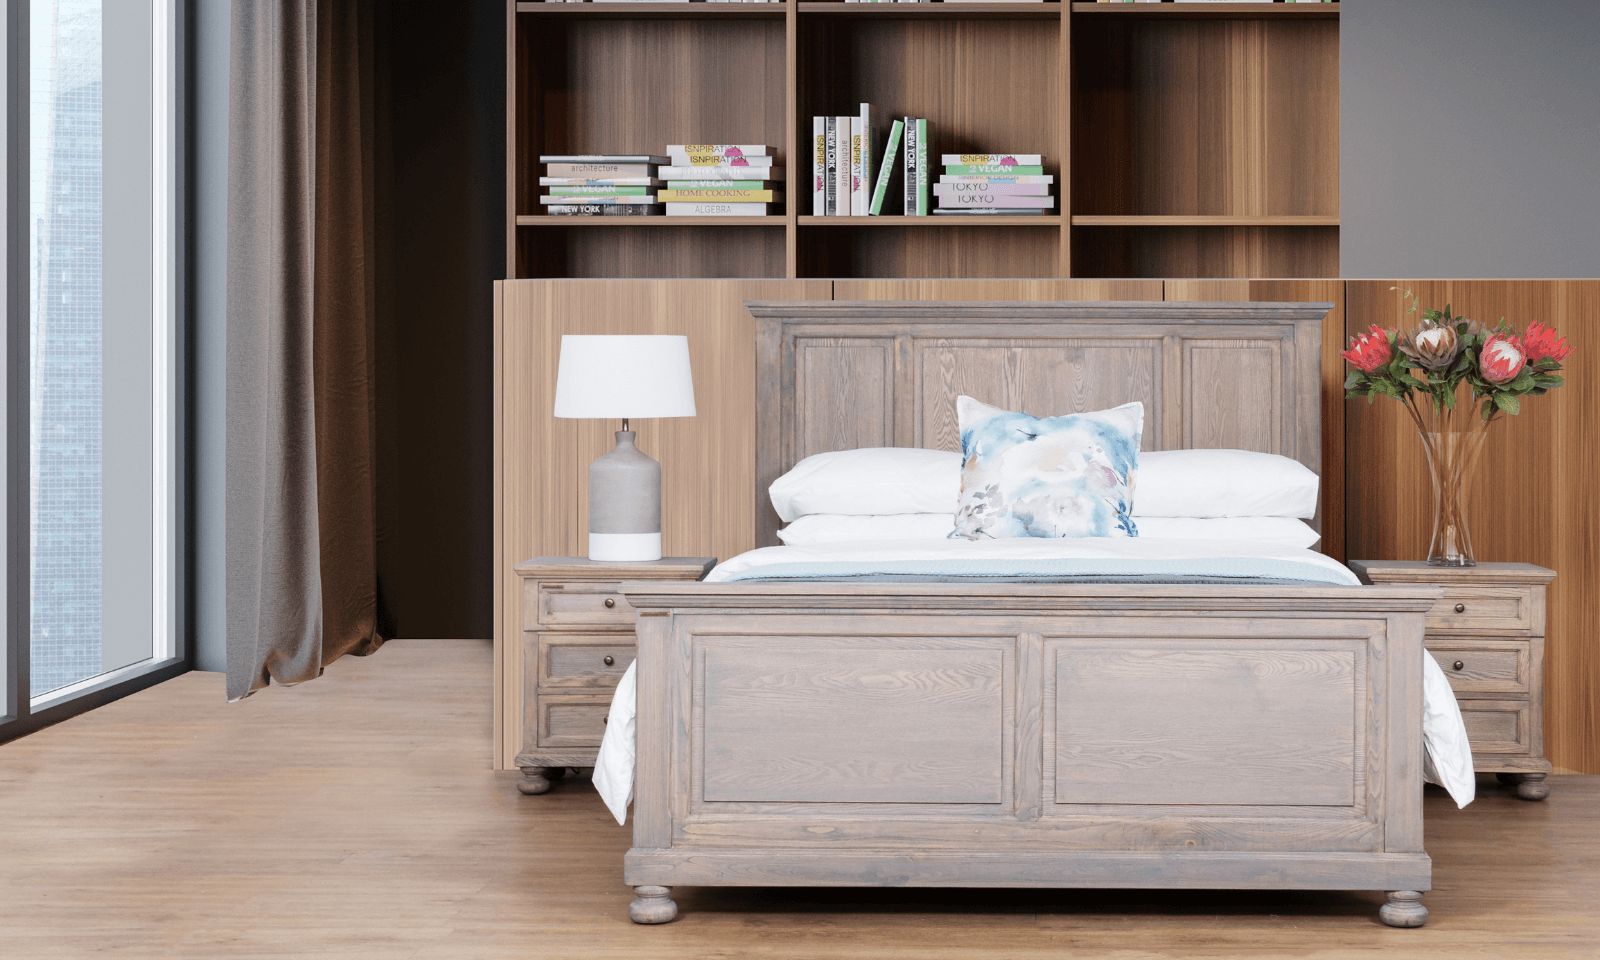 Create large amounts of luxury in a small bedroom